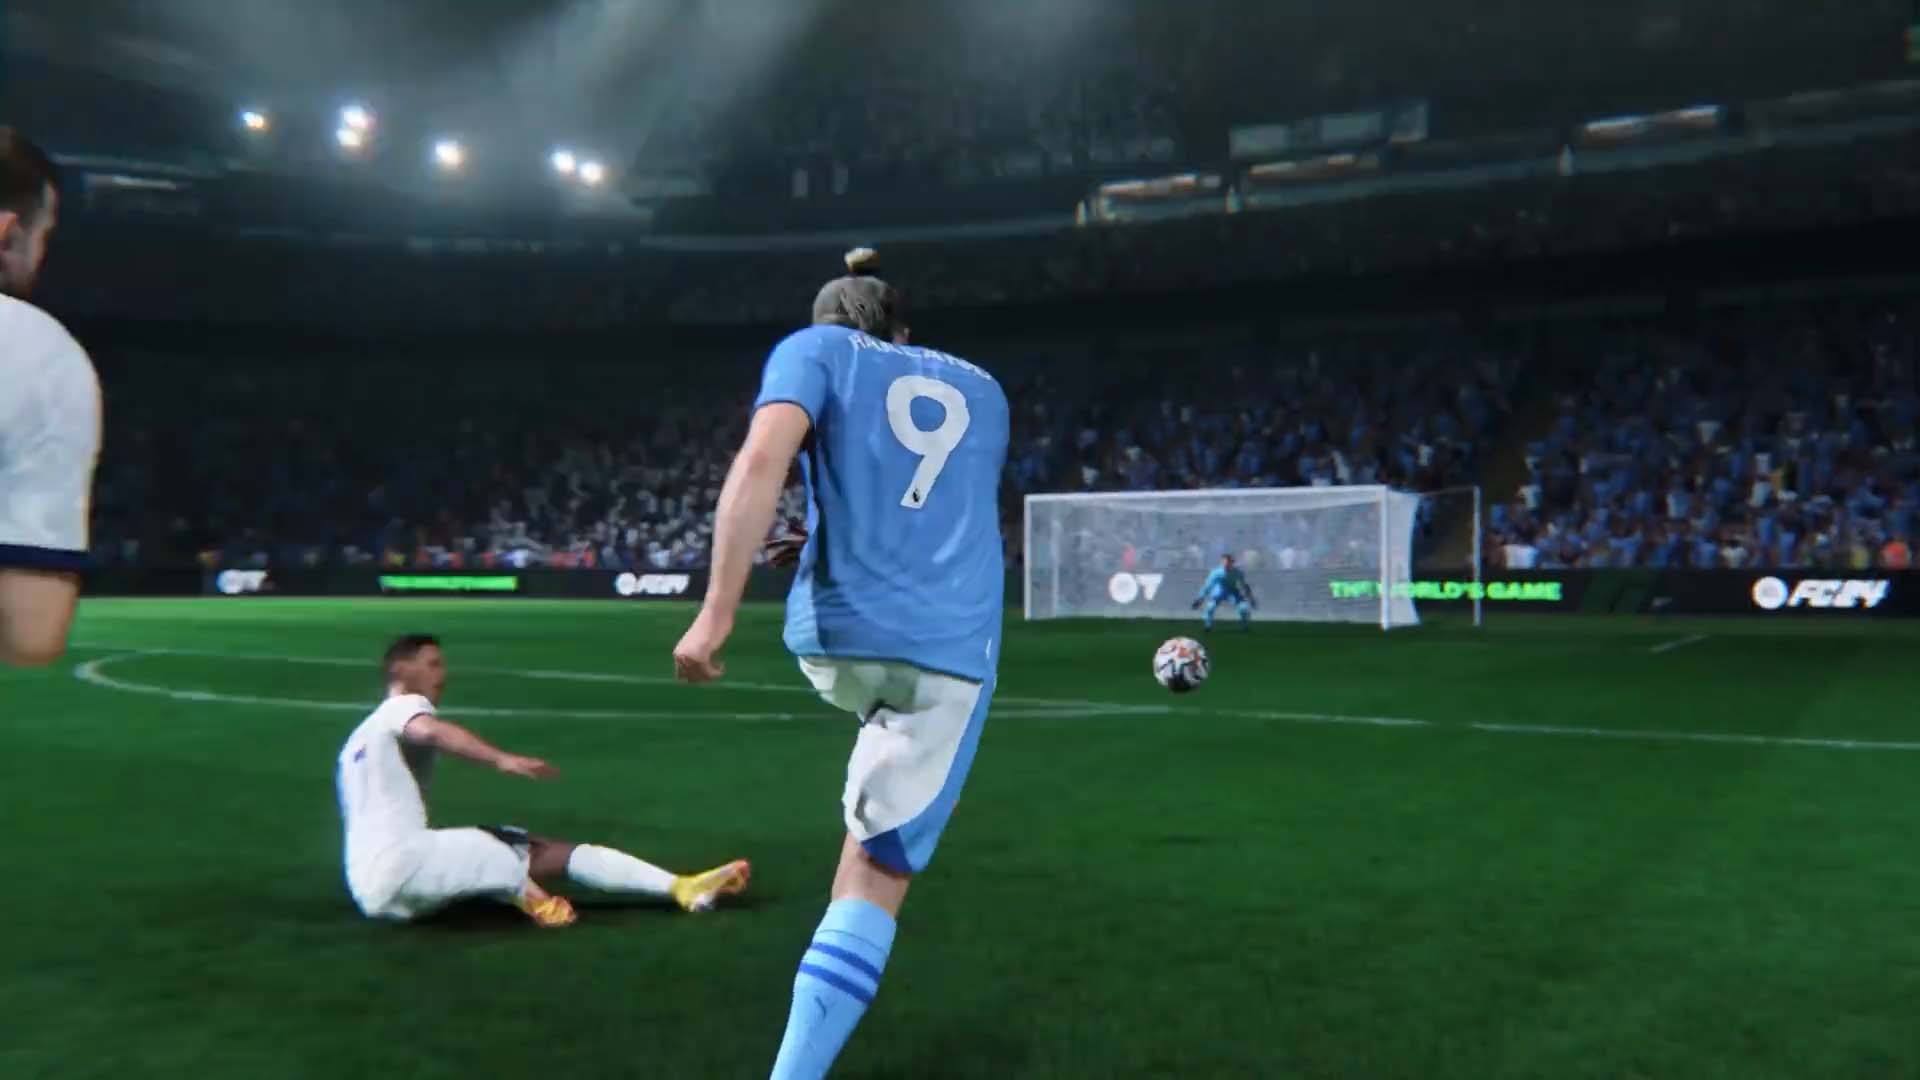 EA Sports FC 24 with Bonus Offer (PS4)